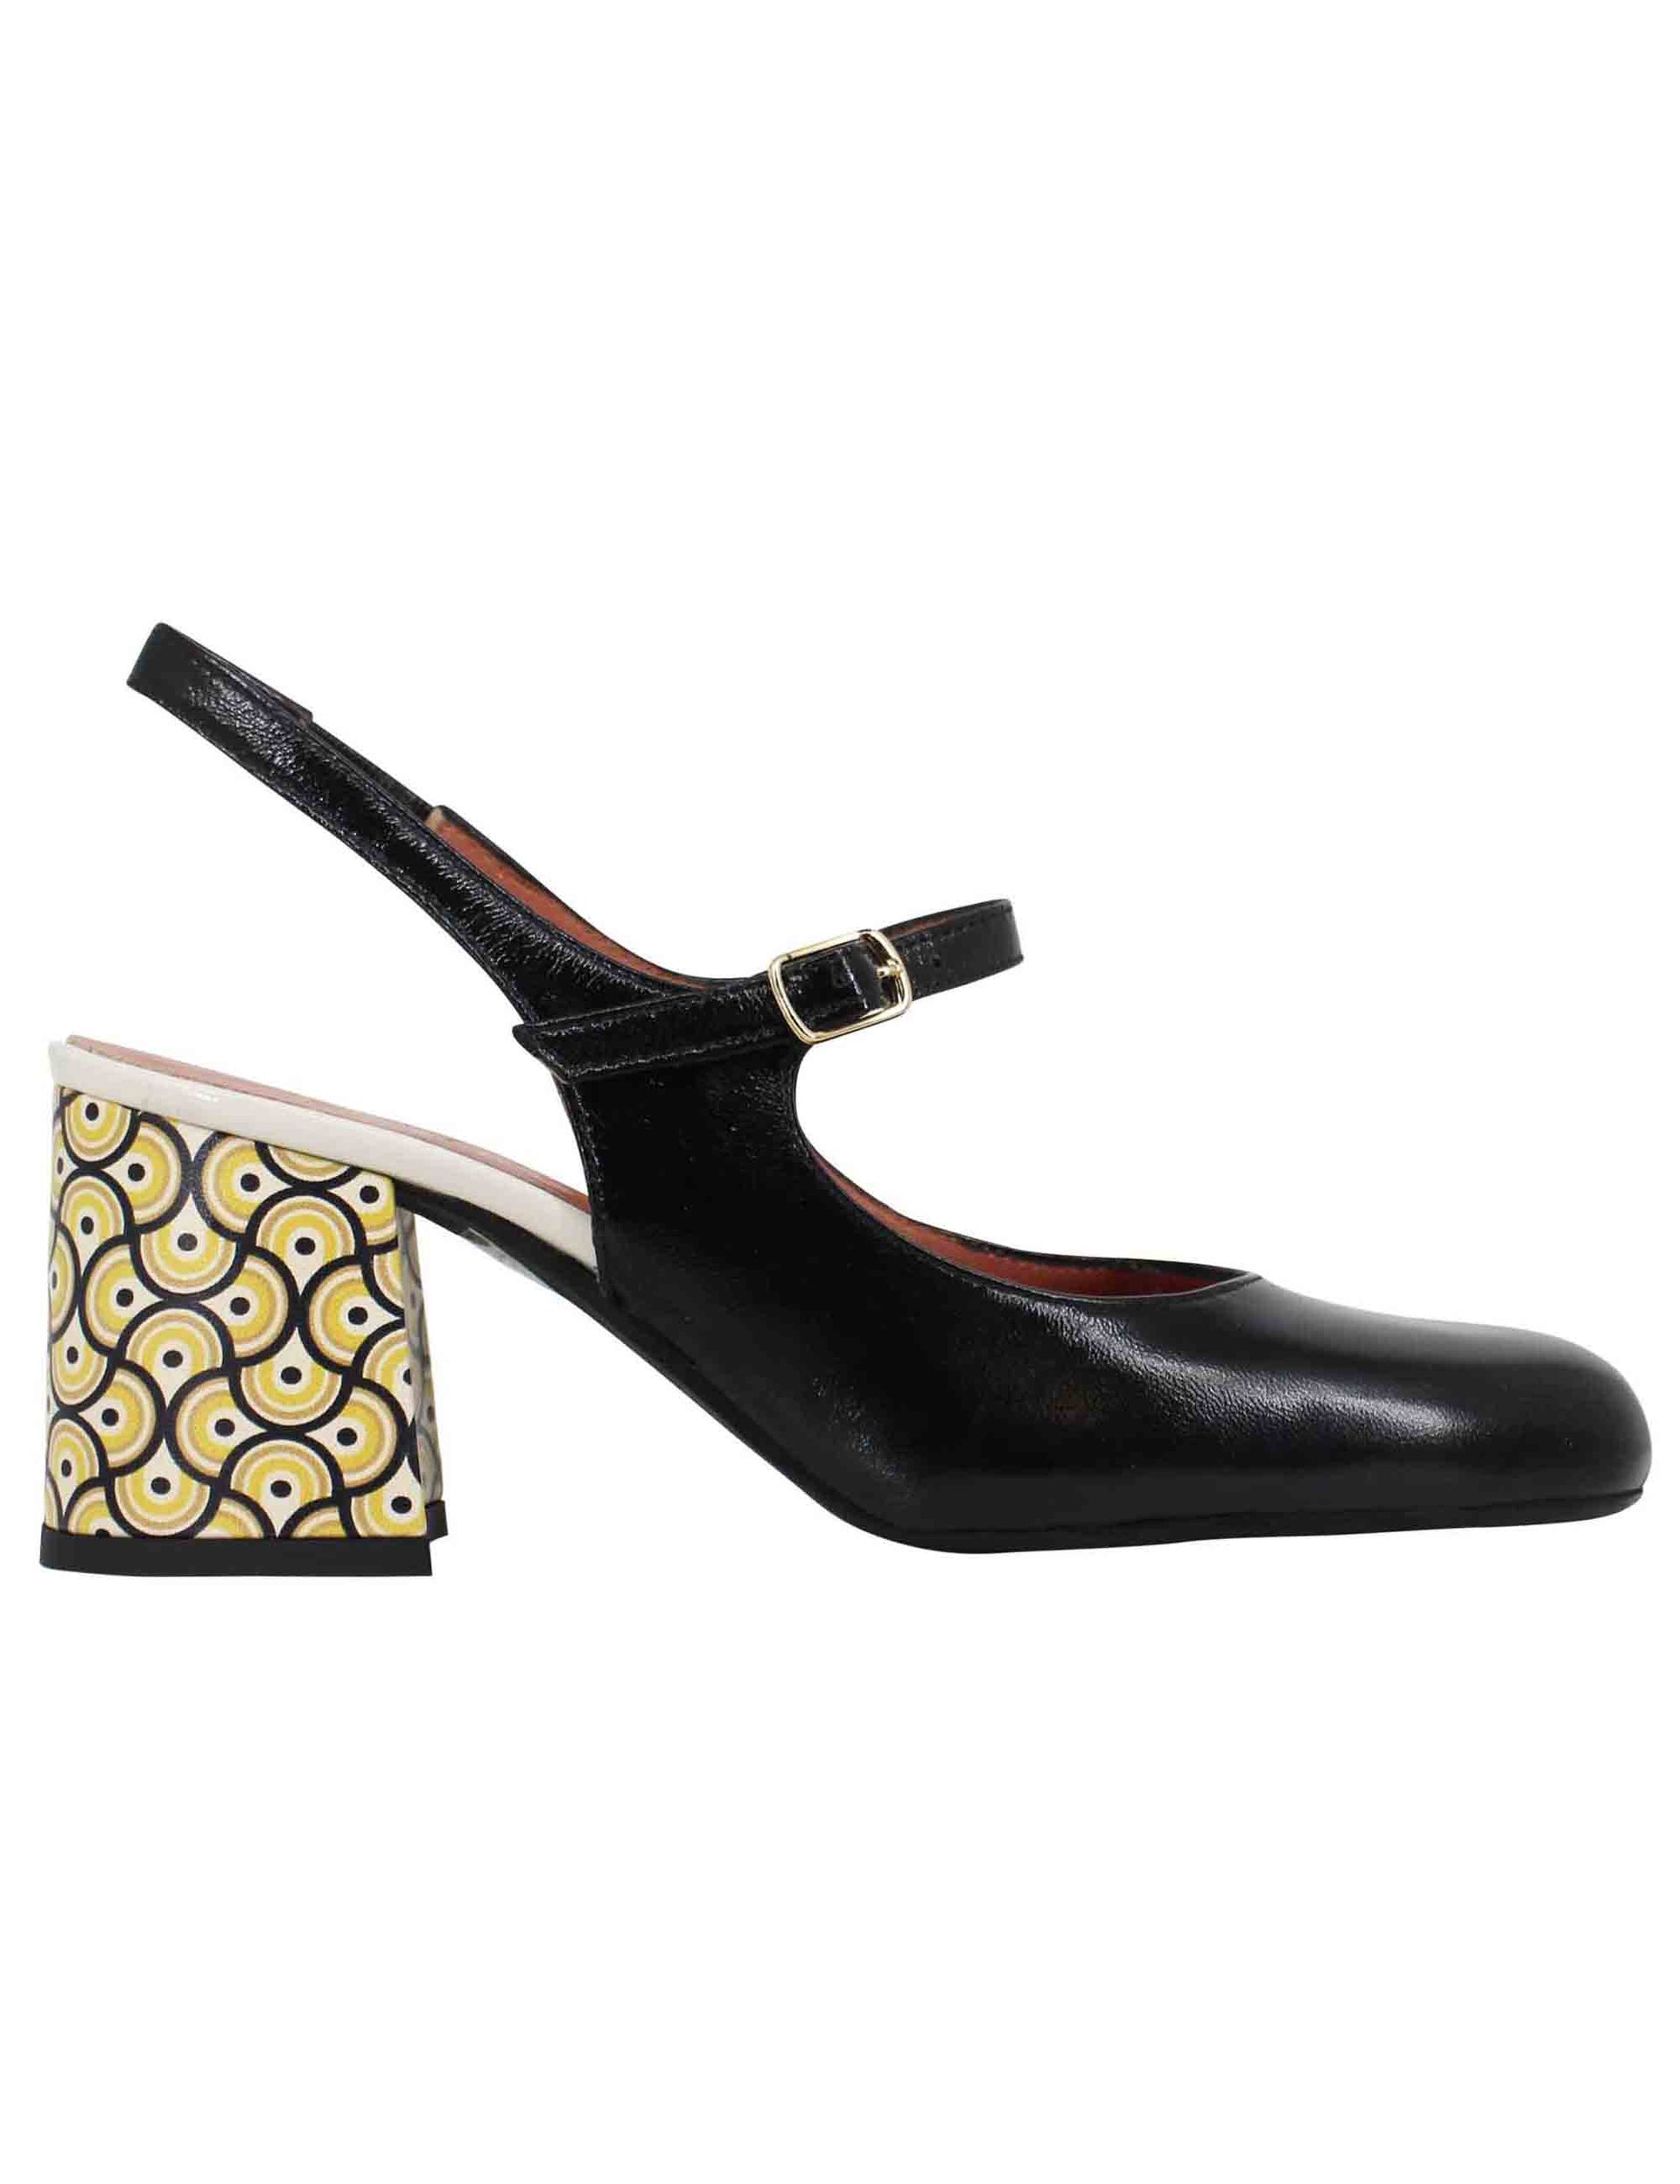 Women's sligback pumps in black leather with round toe